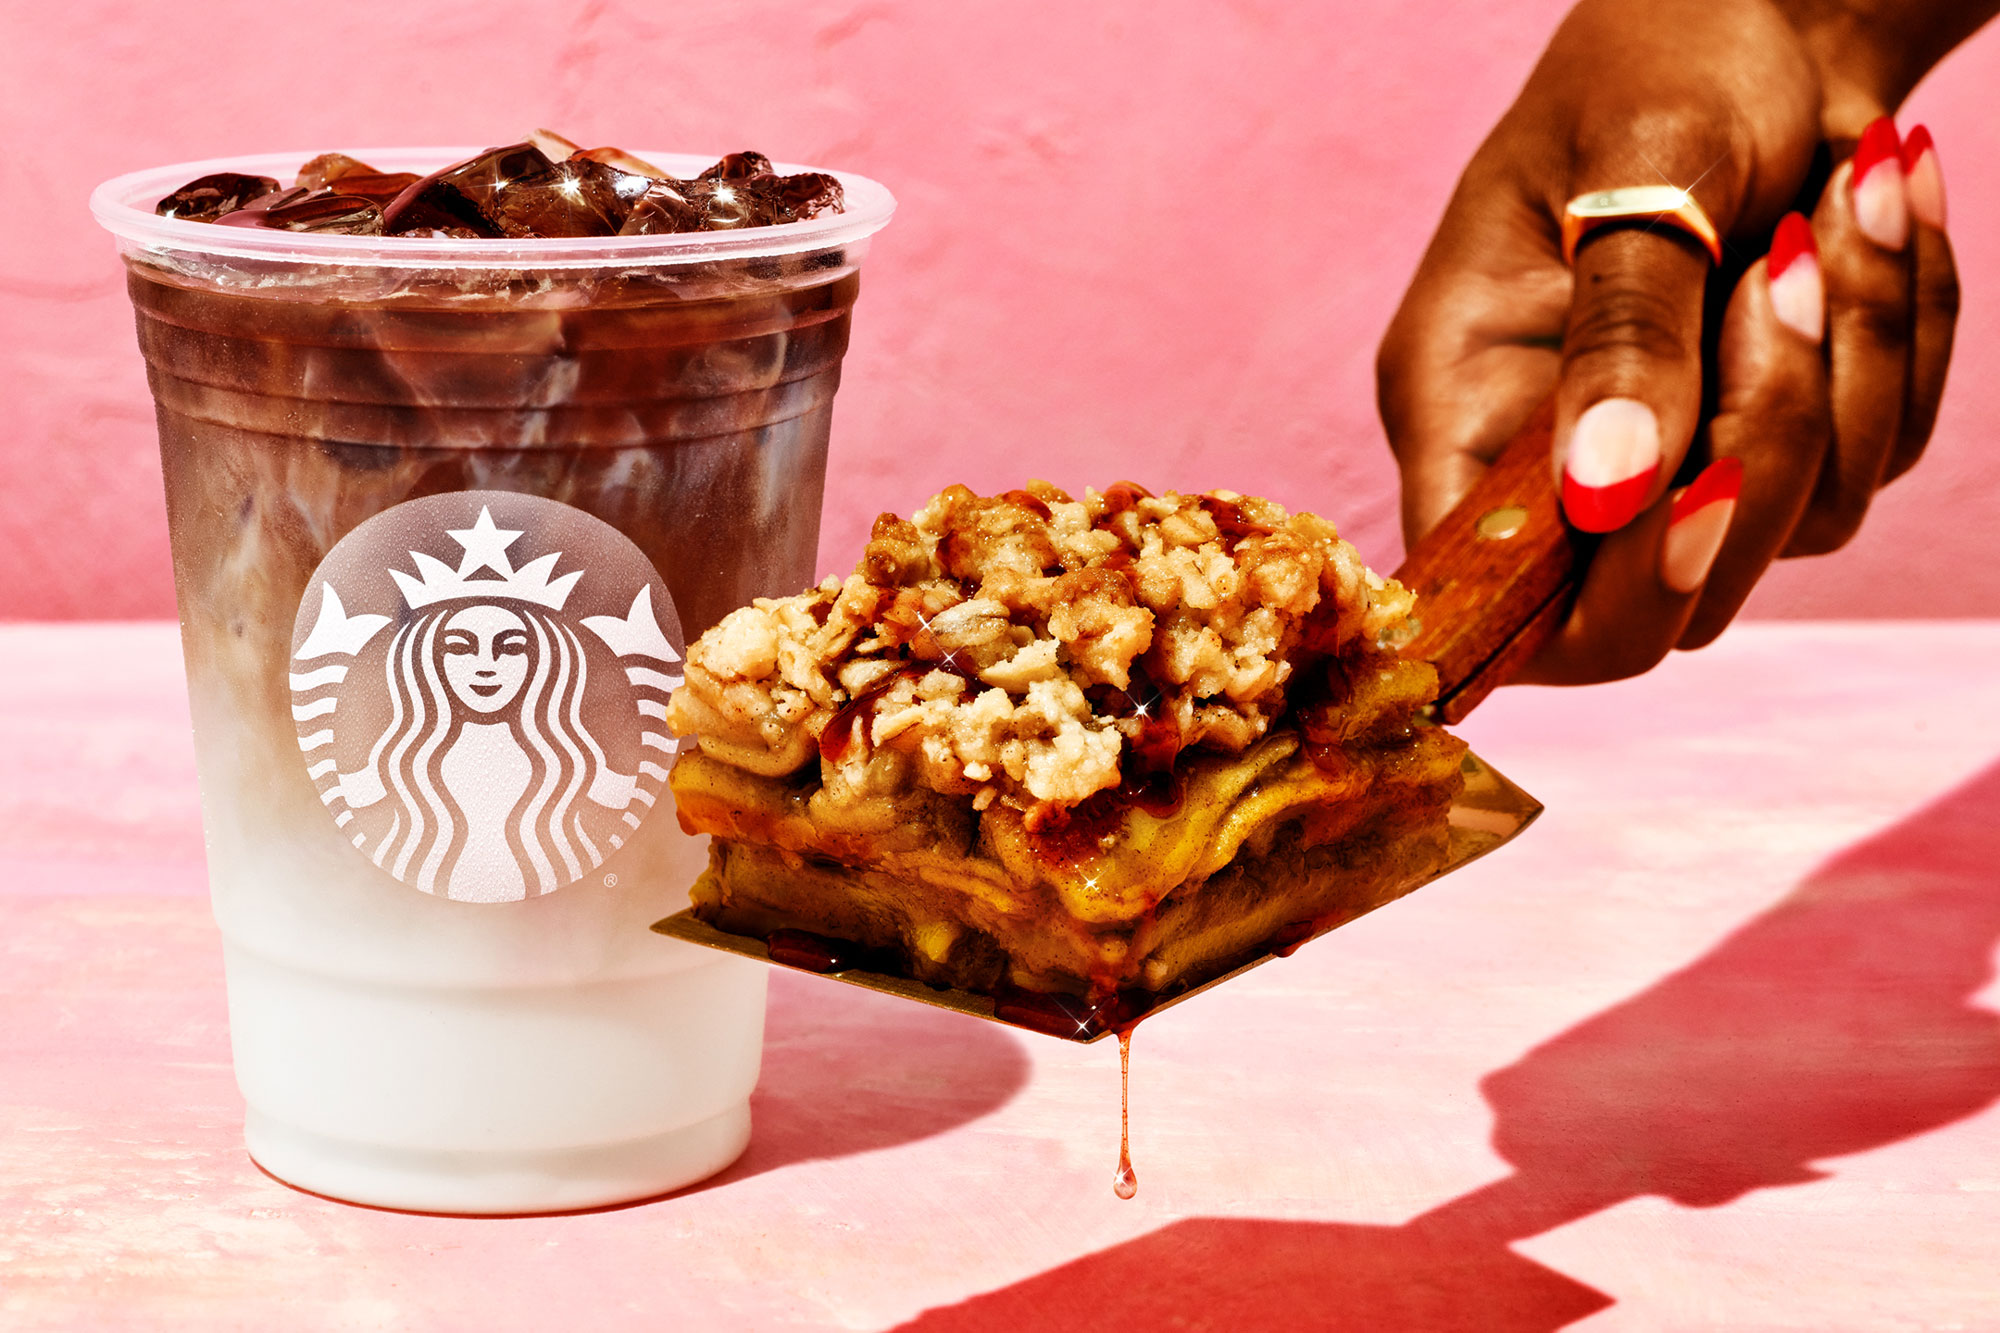 hand holding Starbucks pastry and iced beverages